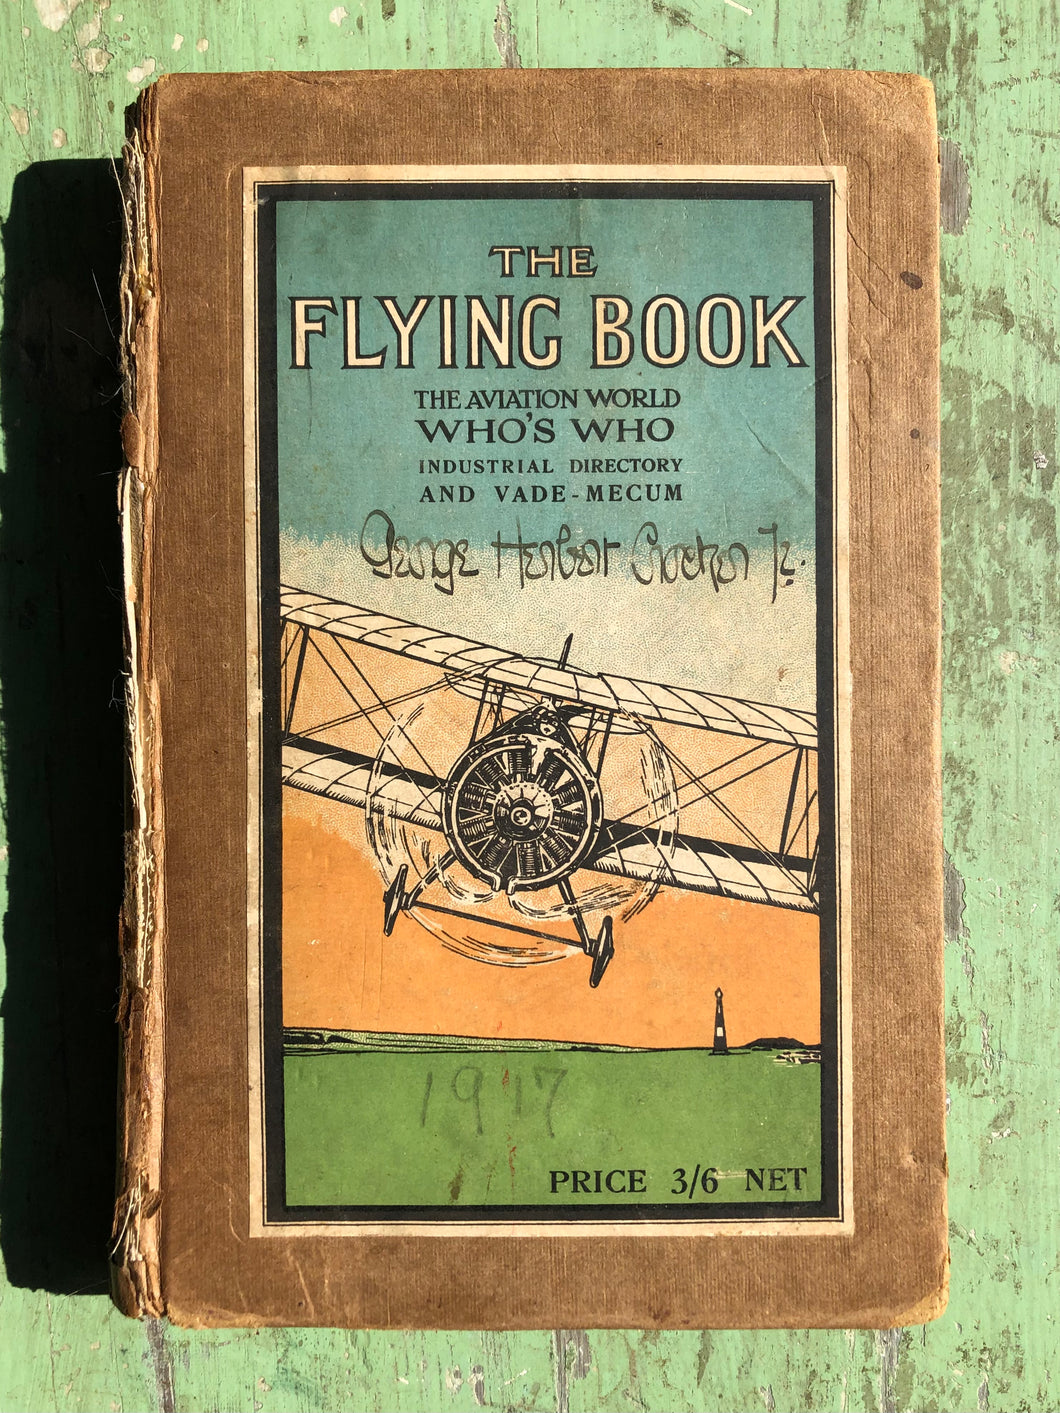 The Flying Book, 1917 Edition edited by W. L. Wade